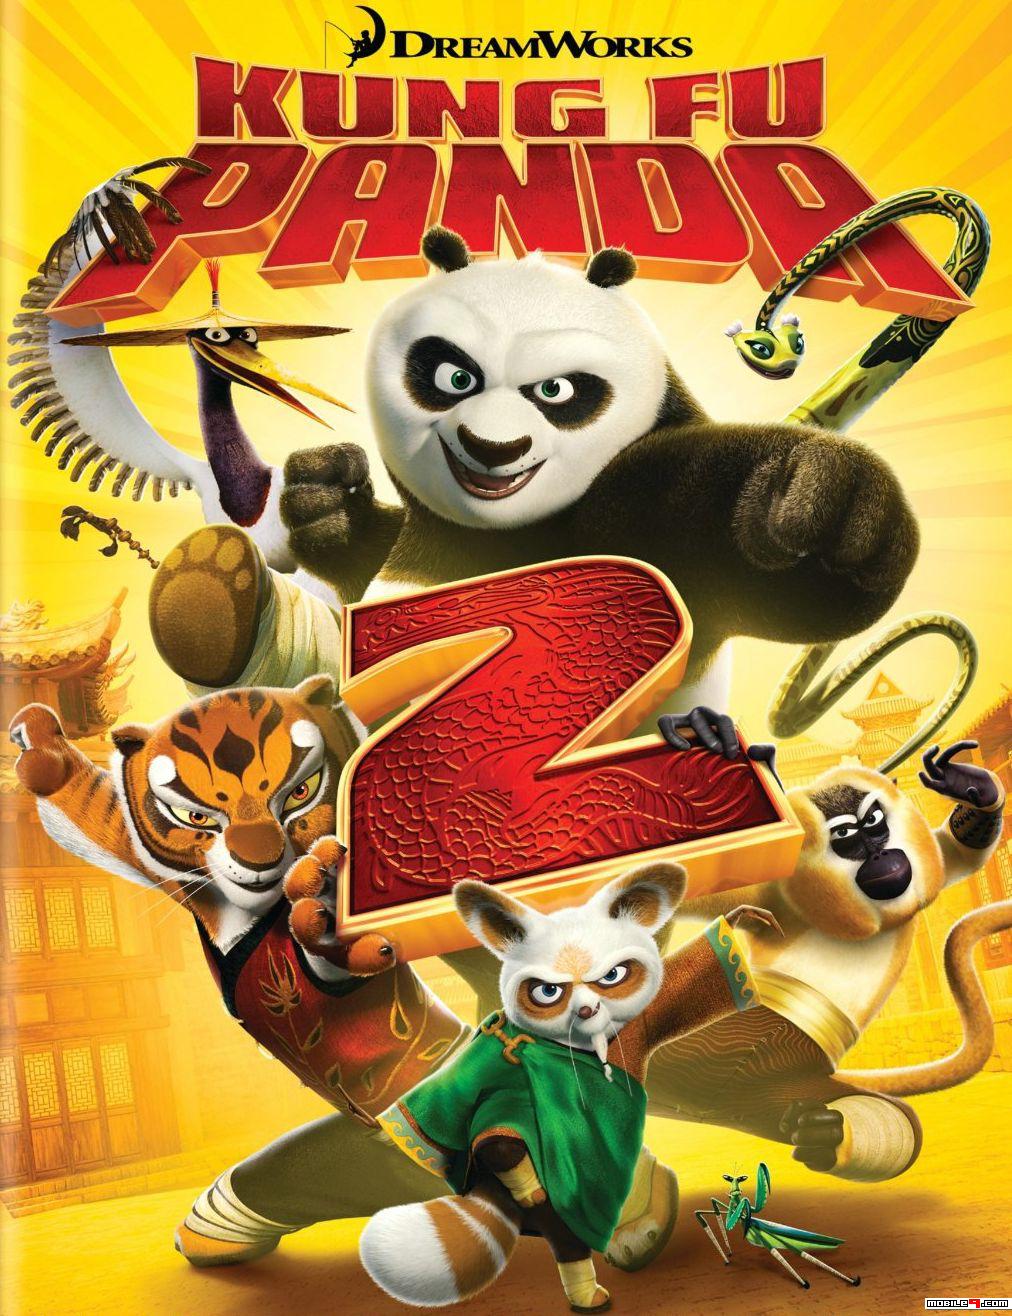 download-kung-fu-panda-2-ds-android-games-apk-4571000-monster-card-battle-strategy-fantasy